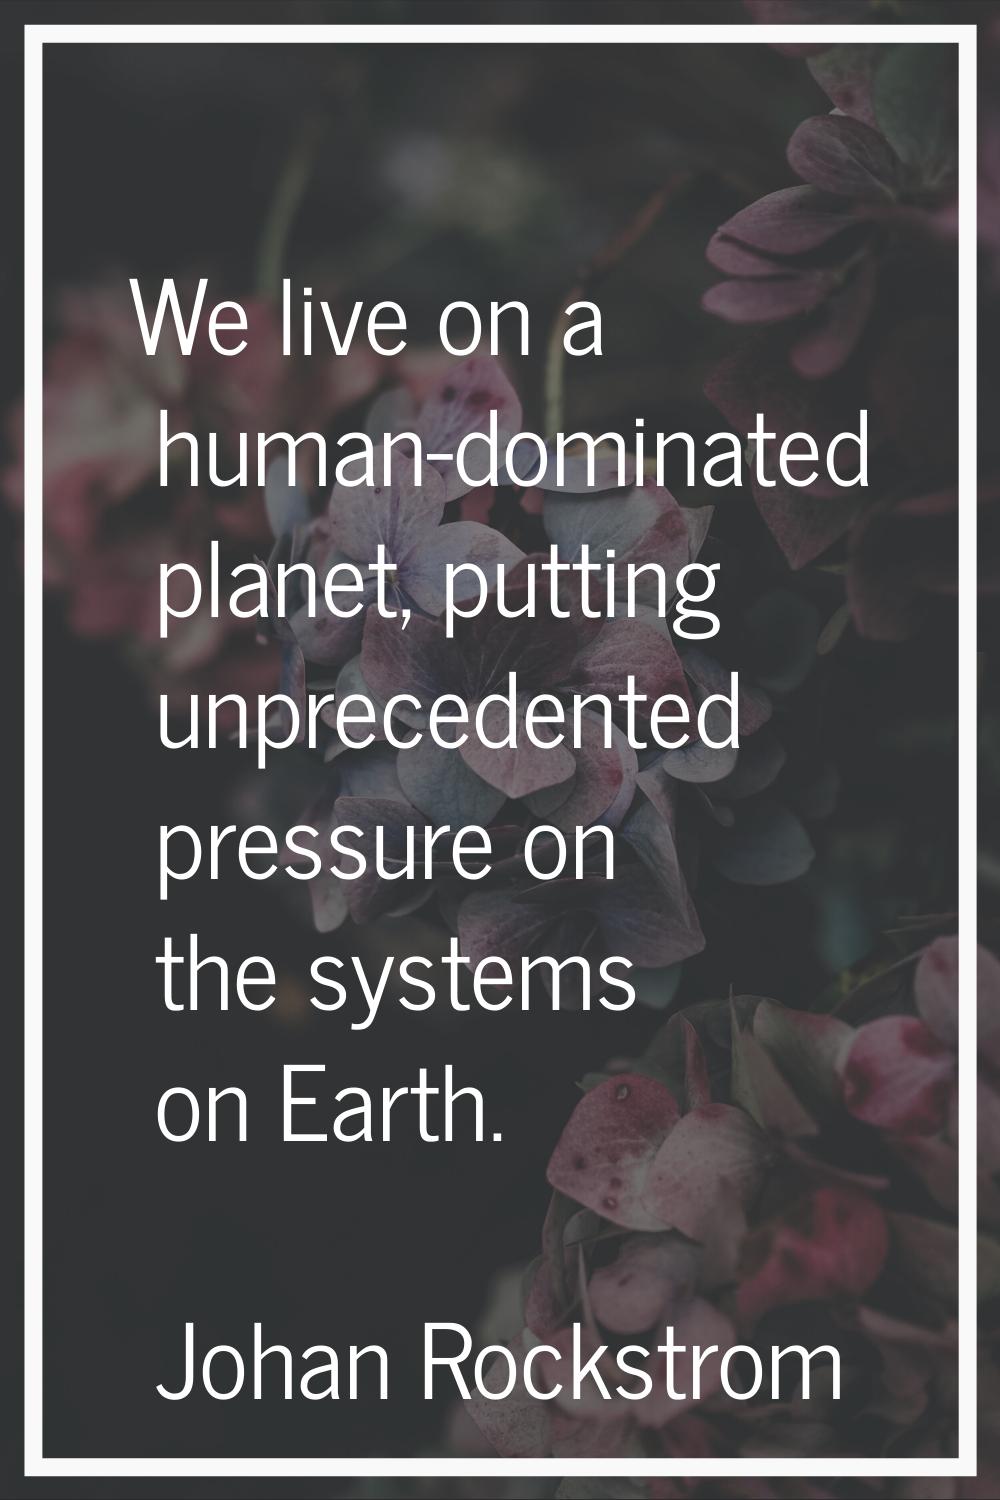 We live on a human-dominated planet, putting unprecedented pressure on the systems on Earth.